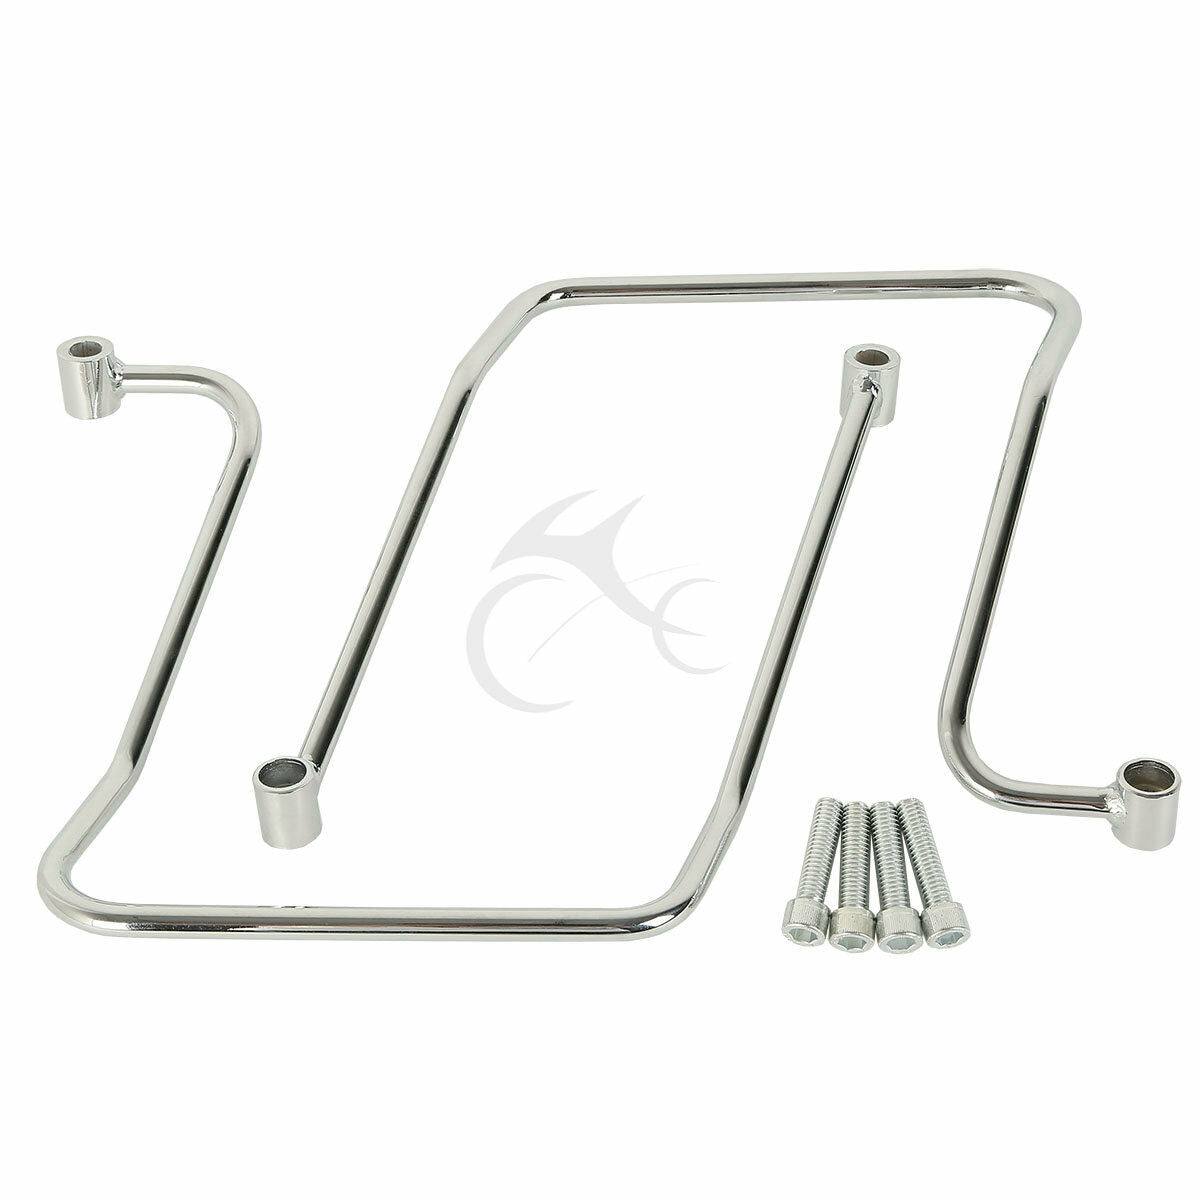 Saddlebag Supports Guard Brackets Fit For Harley Dyna Fat Street Bob 2006-2017 - Moto Life Products